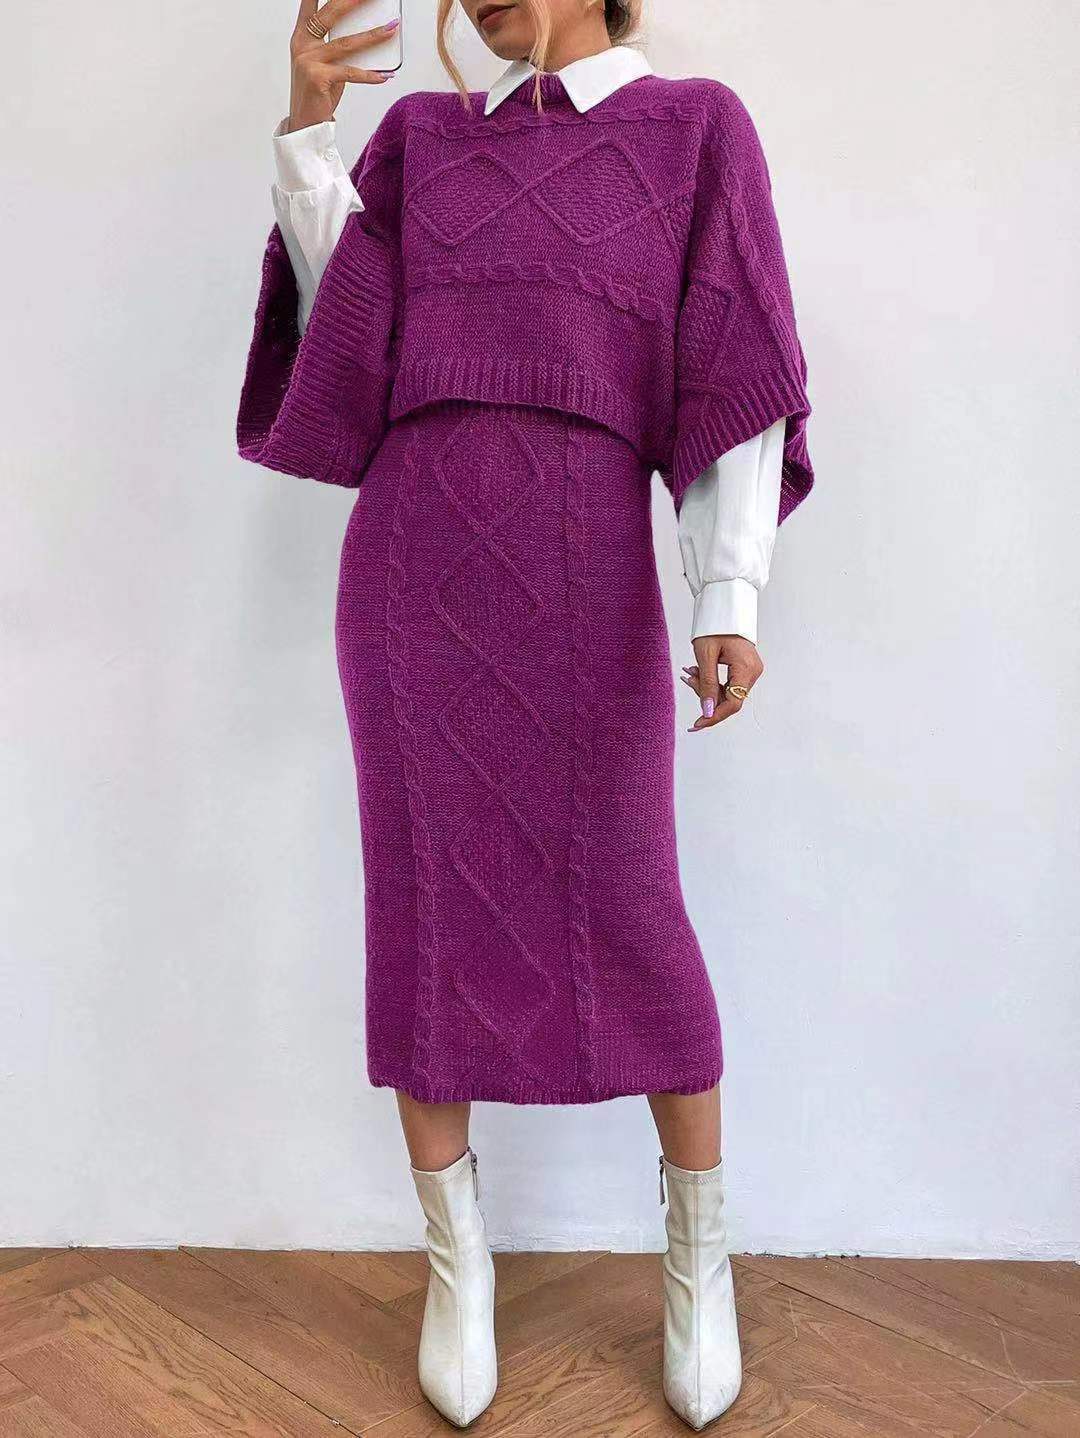 Women's Fashion Cable-knit Sweater Coat Wool Skirt